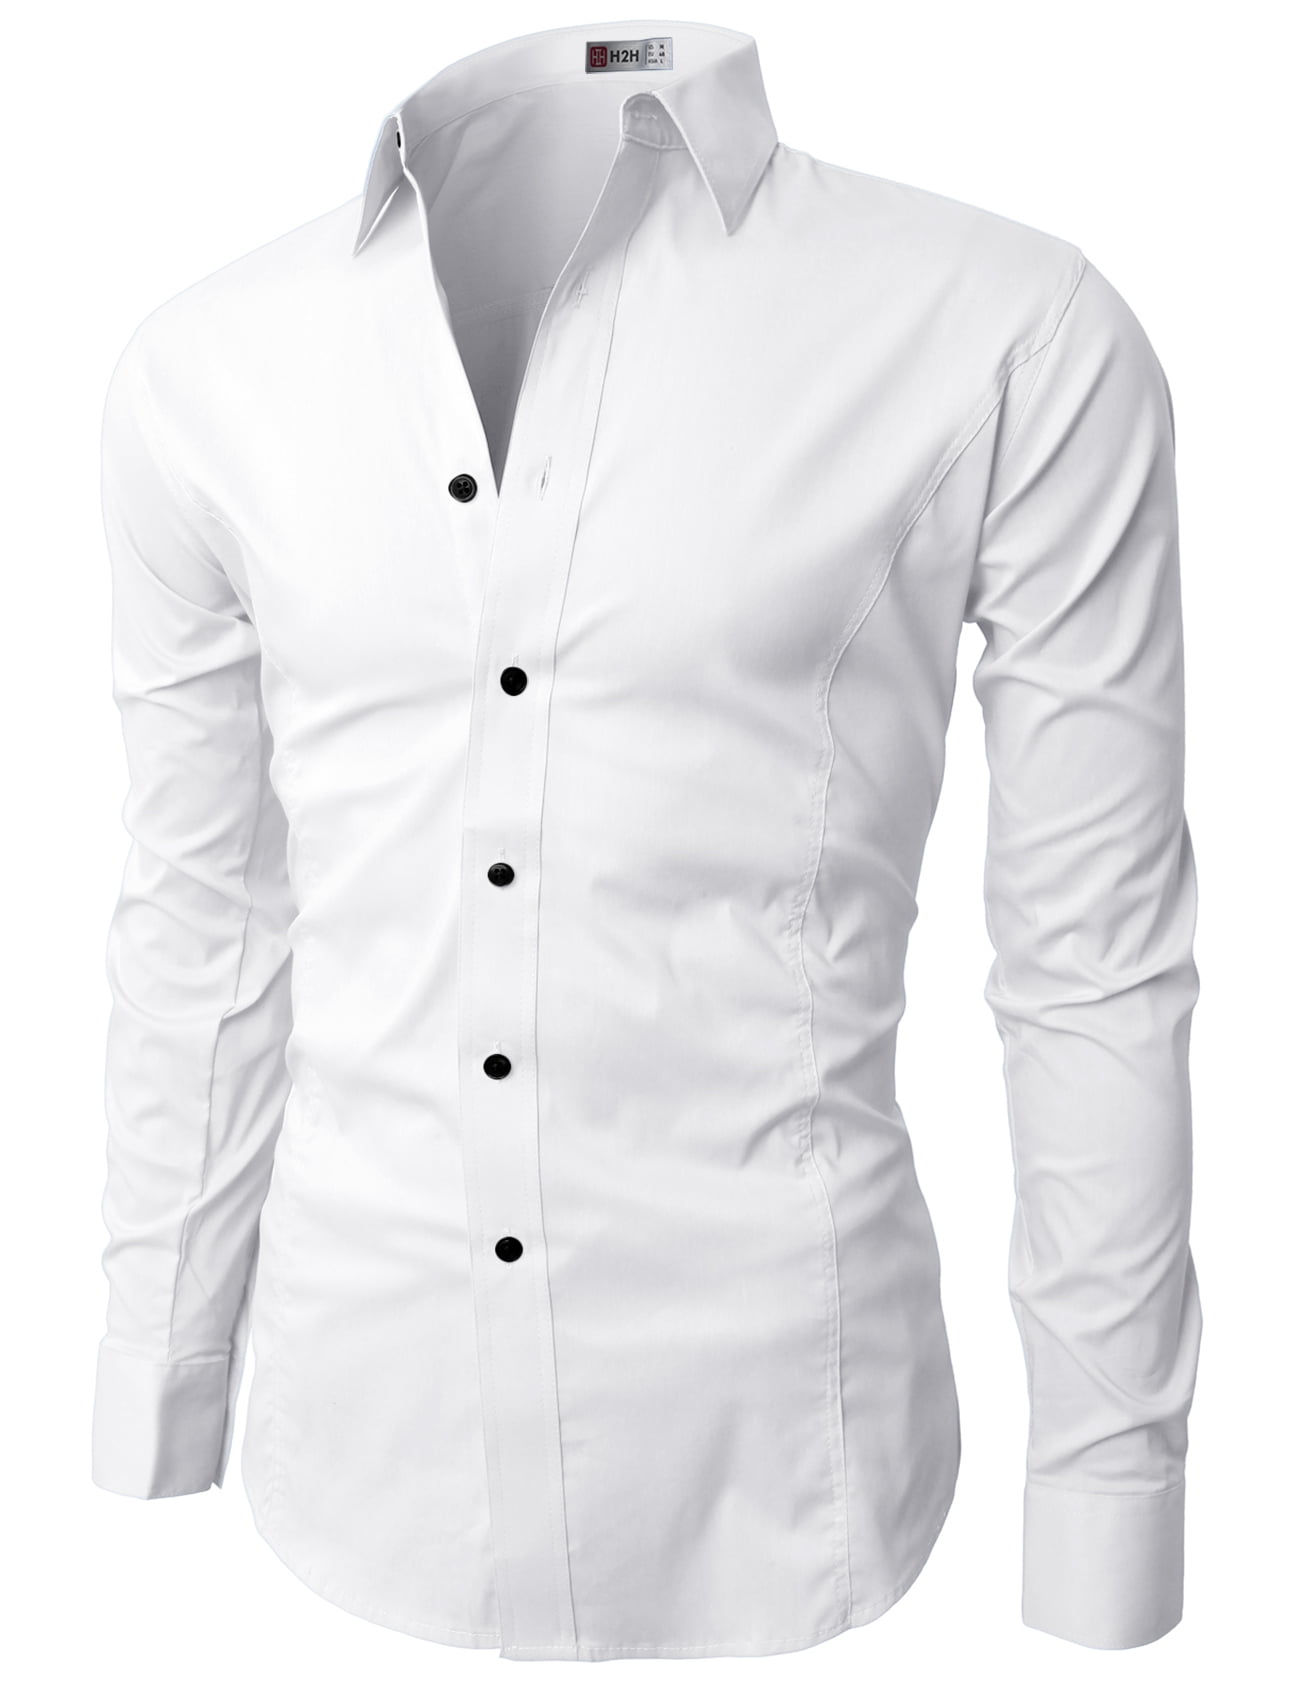 Details about   Chic Mens Formal Business Dress Shirt Stripes Long Sleeves Short Style Buttom 